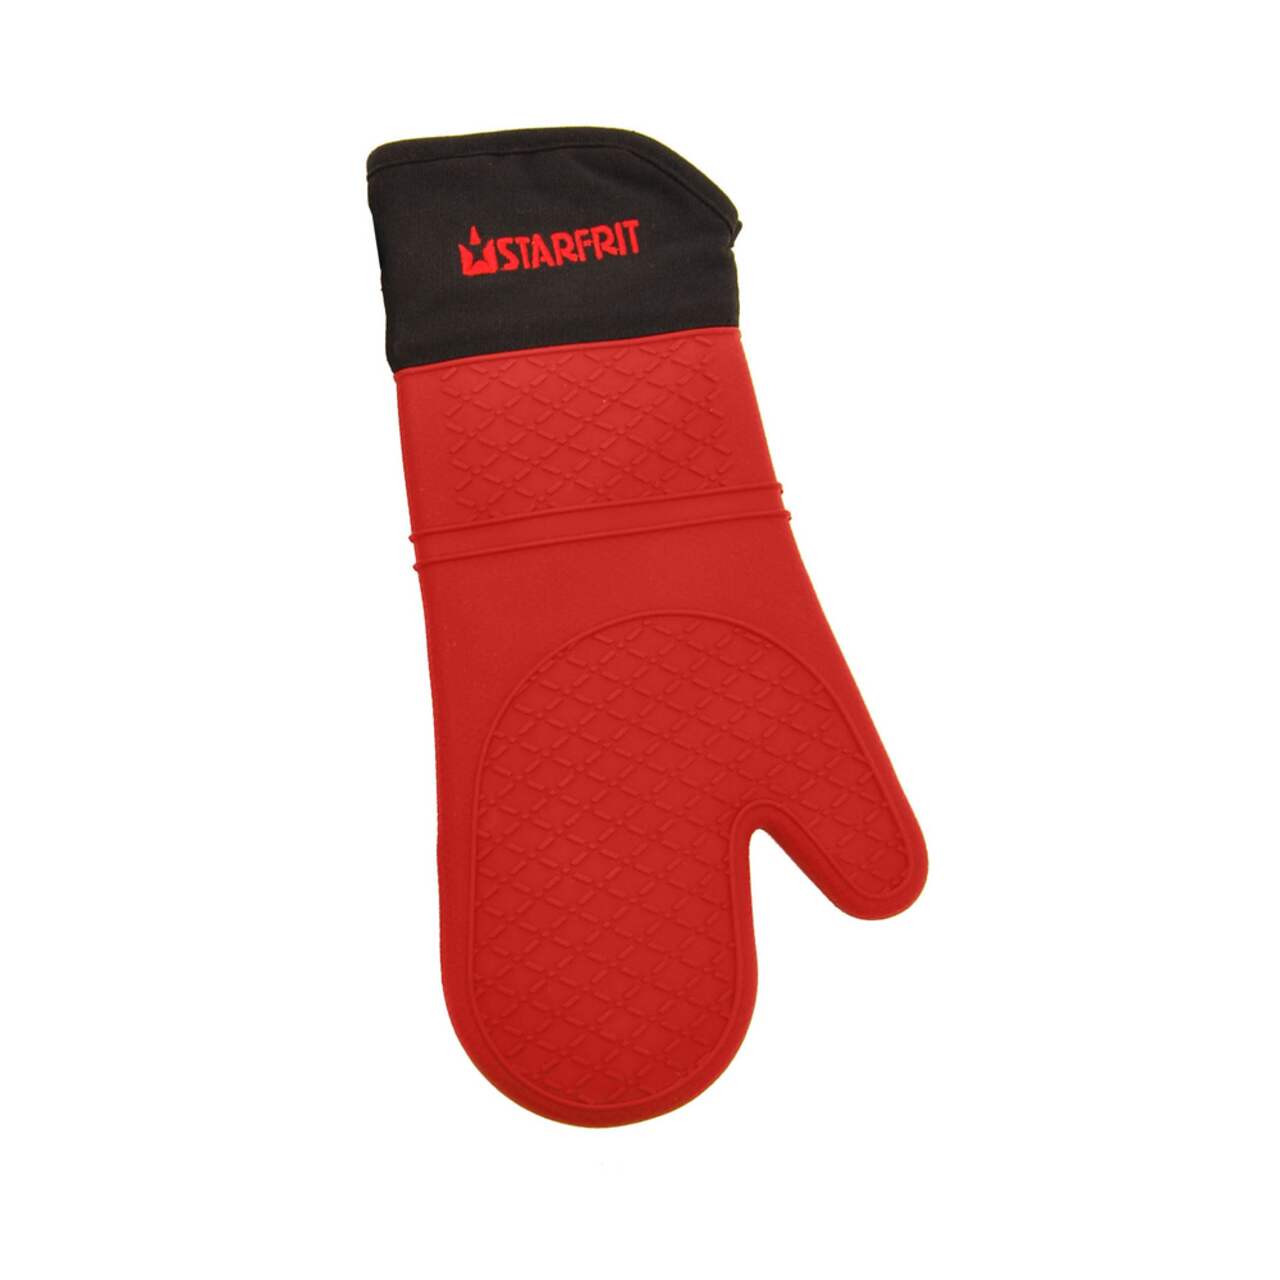 Starfrit Silicone Oven Mitt with Cotton Liner, Non-Slip Grip, Red/Black